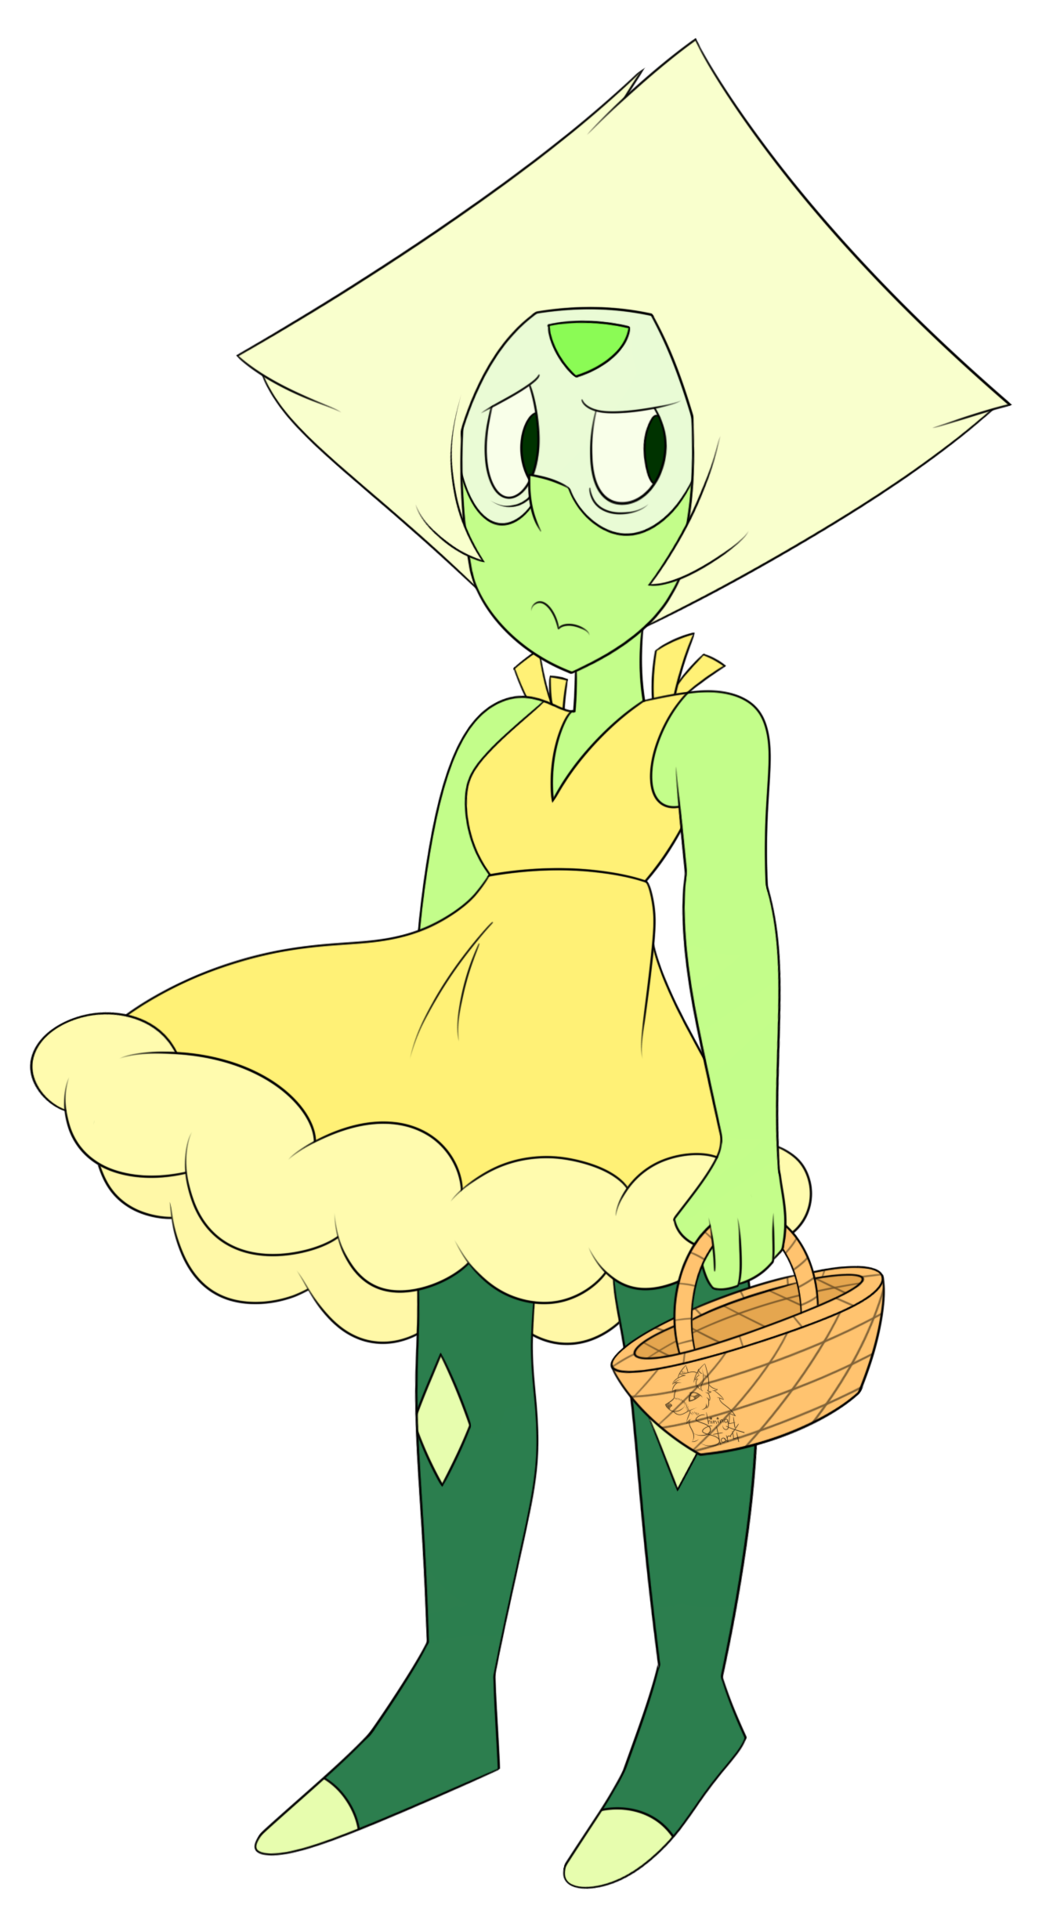 Peridot was absolutely adorable in the latest episode. We loved her dress and the idea of her being friends with Onion and just hanging out has been between us for awhile.